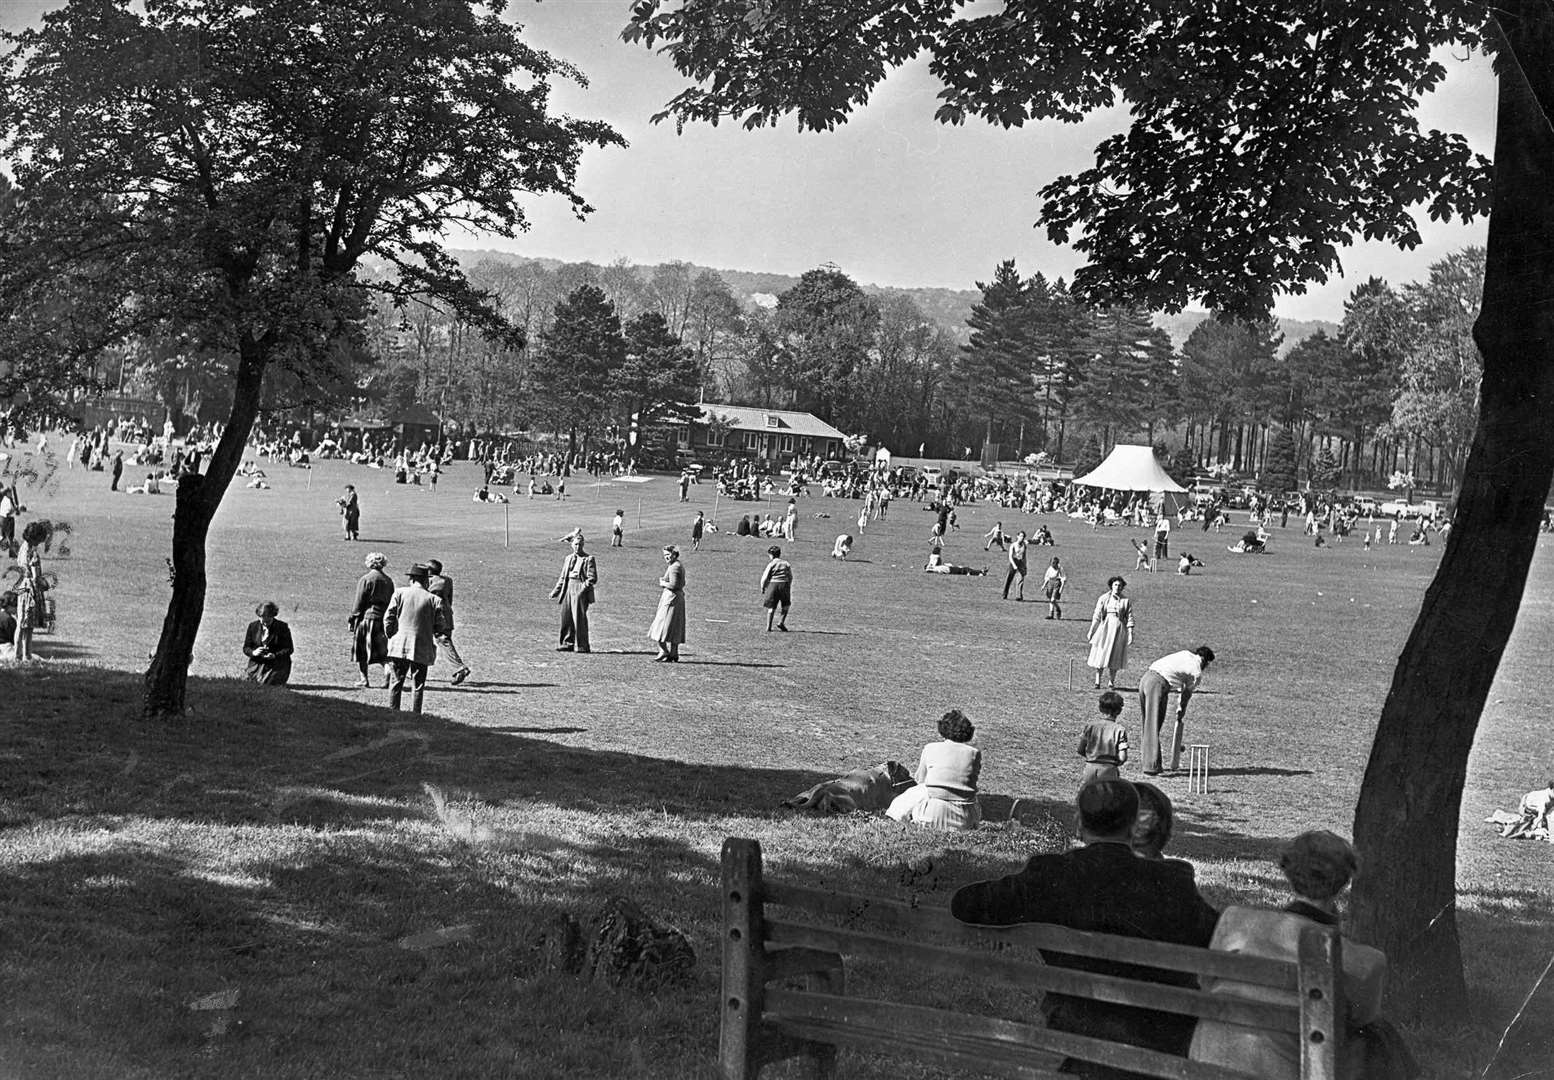 A relaxed group of families enjoying themselves in 1956 at Penenden Heath - which was once the site of Maidstone's public hangings!